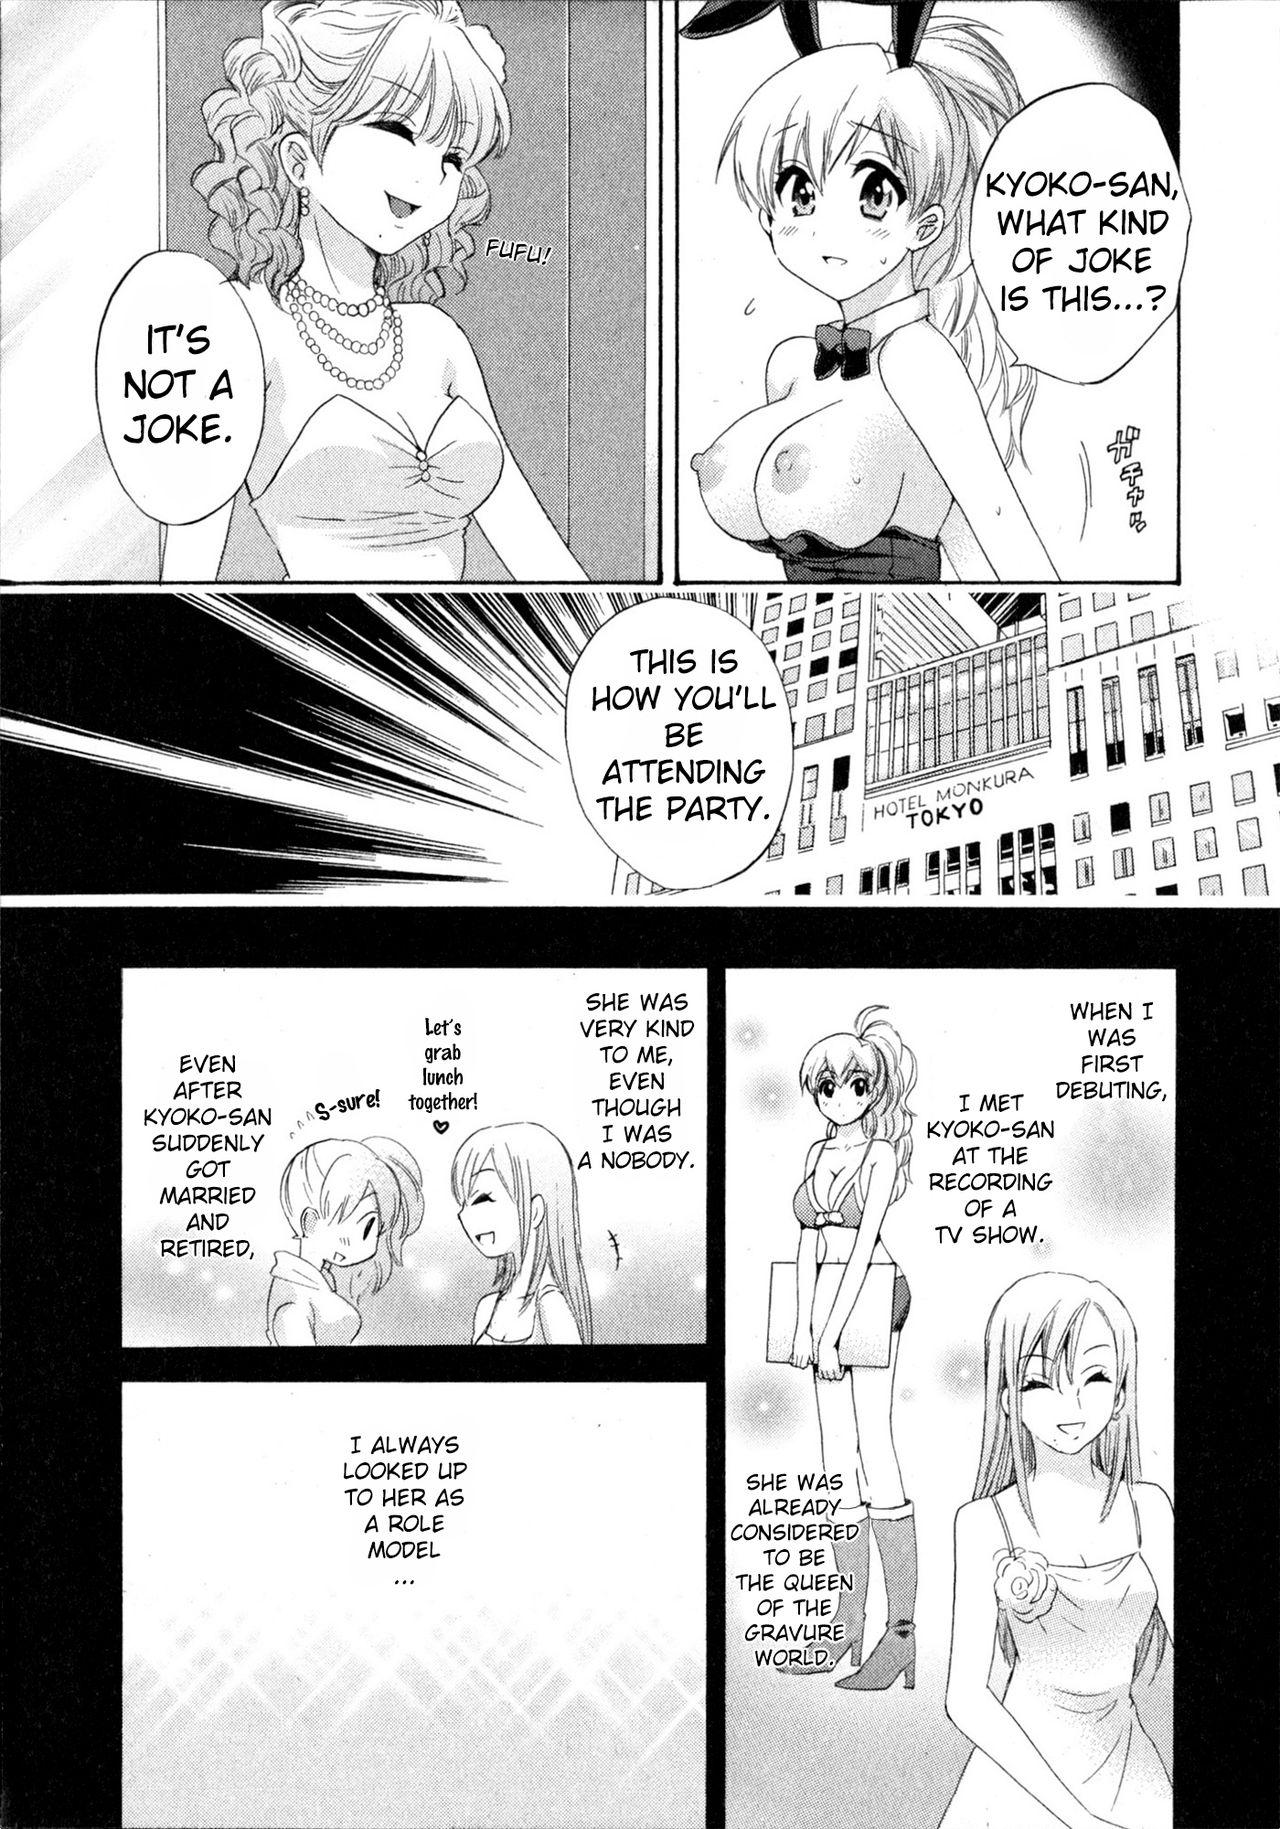 Hot Wife Tenshi no Marshmallow 4 Ch. 25-27 Jerk Off - Page 11